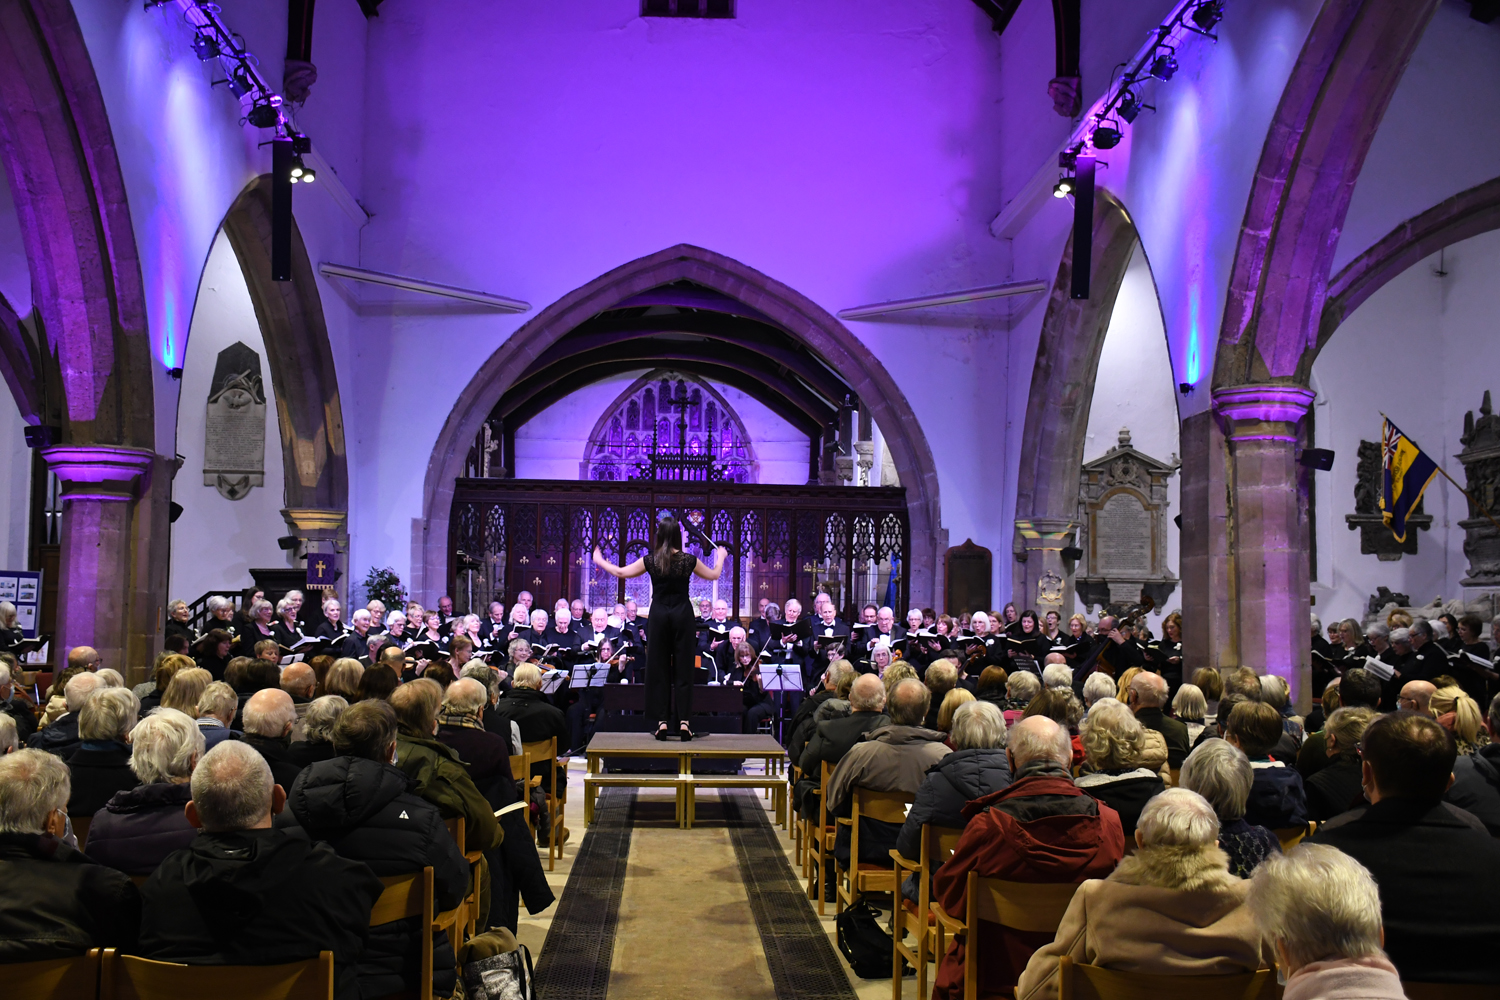 Review: Ilkley and Otley Choral Societies’ Concert, St Margaret’s Church Ilkley 21st May 2022